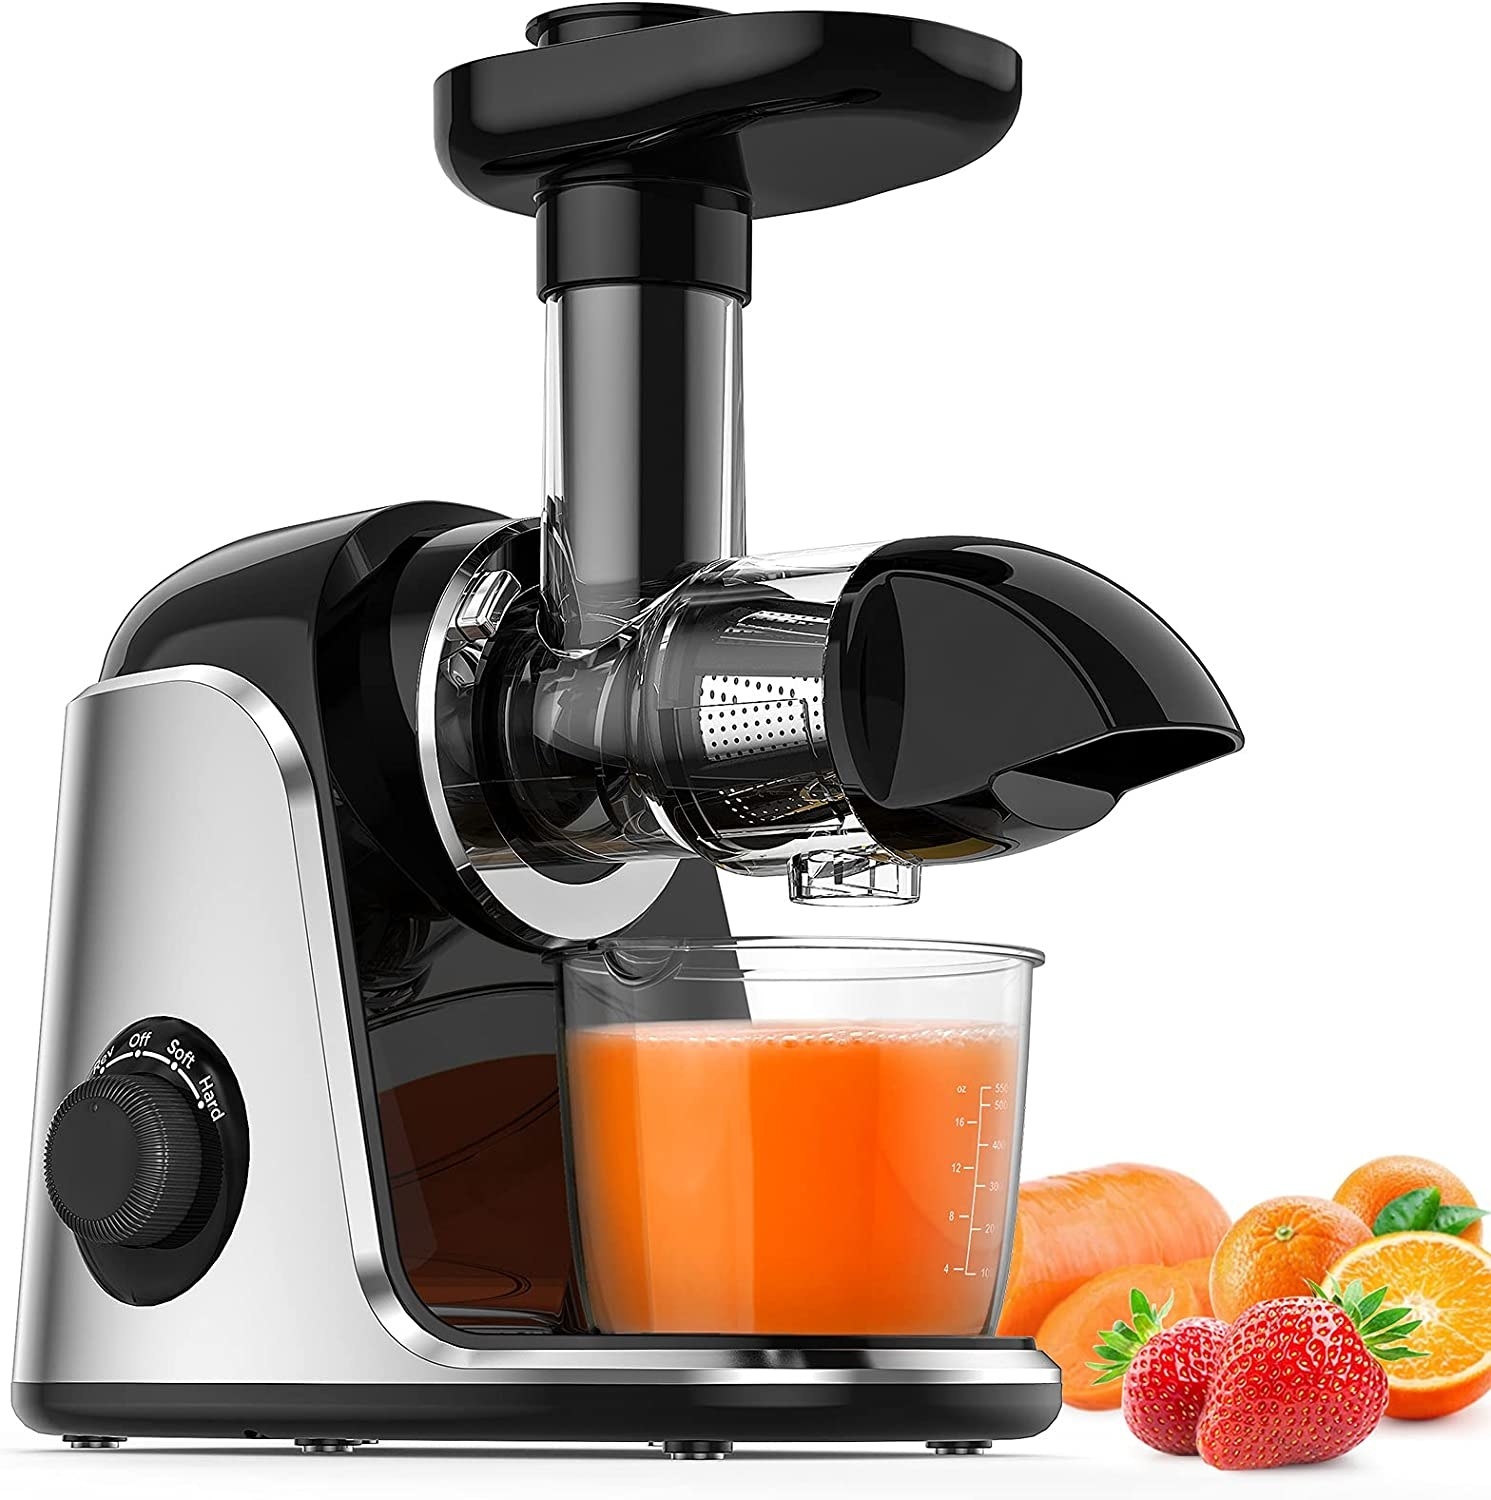 a large juicing machine on a white background next to various fruits